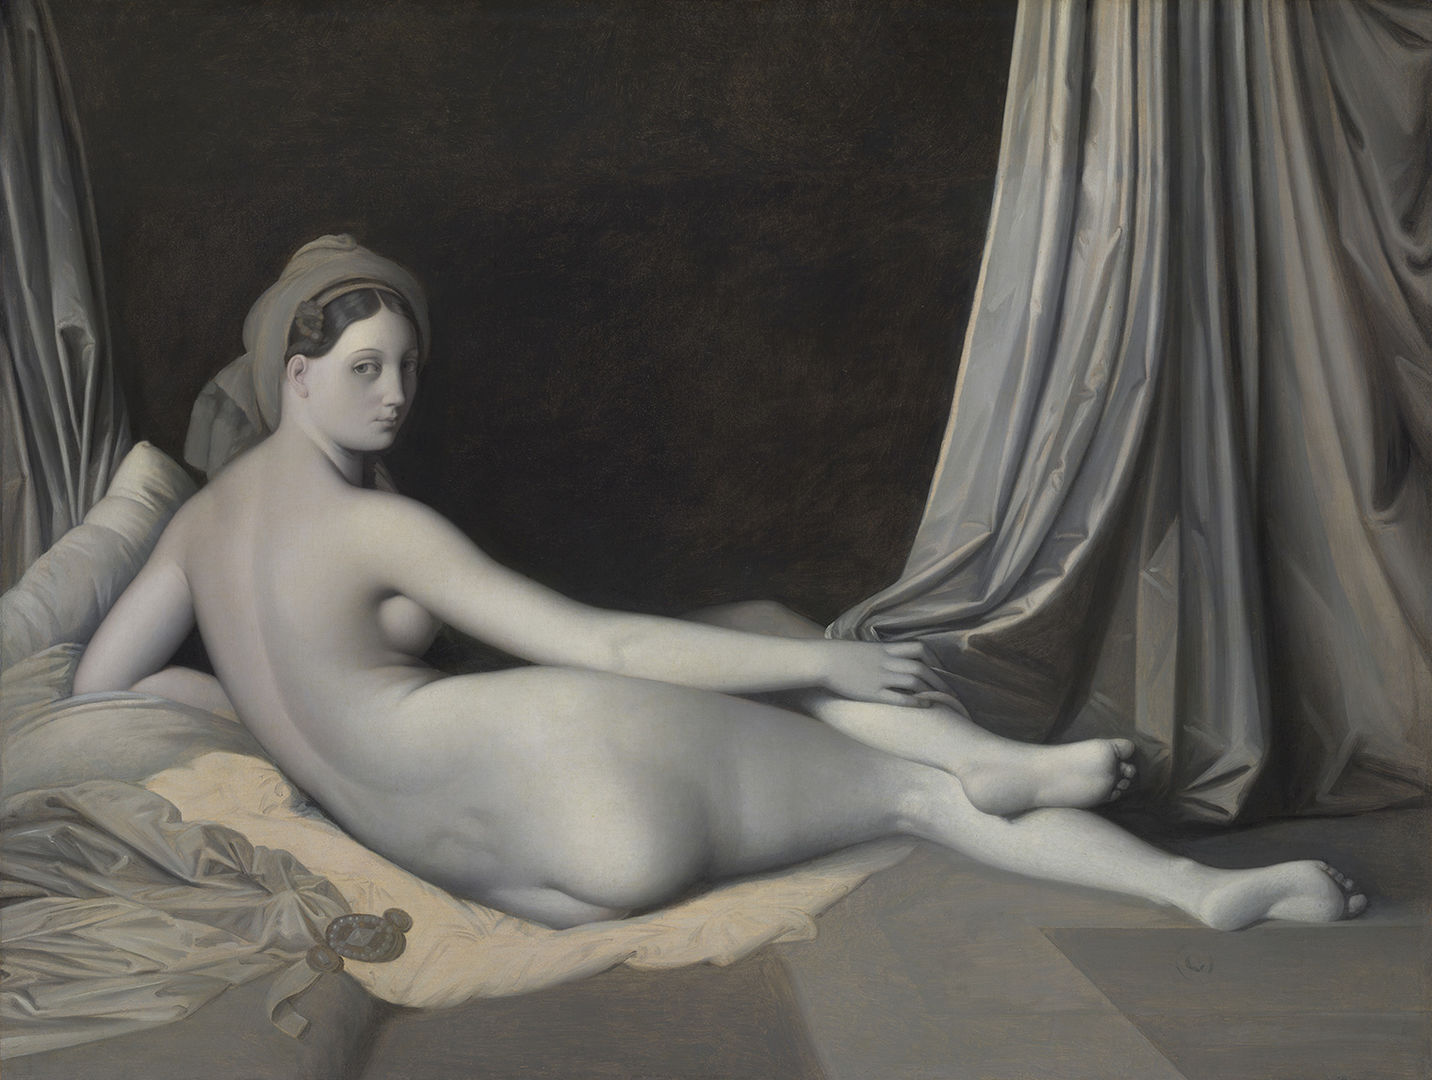 A nude woman reclines in a bed. Her back faces the viewer, but her head is turned towards the audience. Heavy drapes frame the image. 